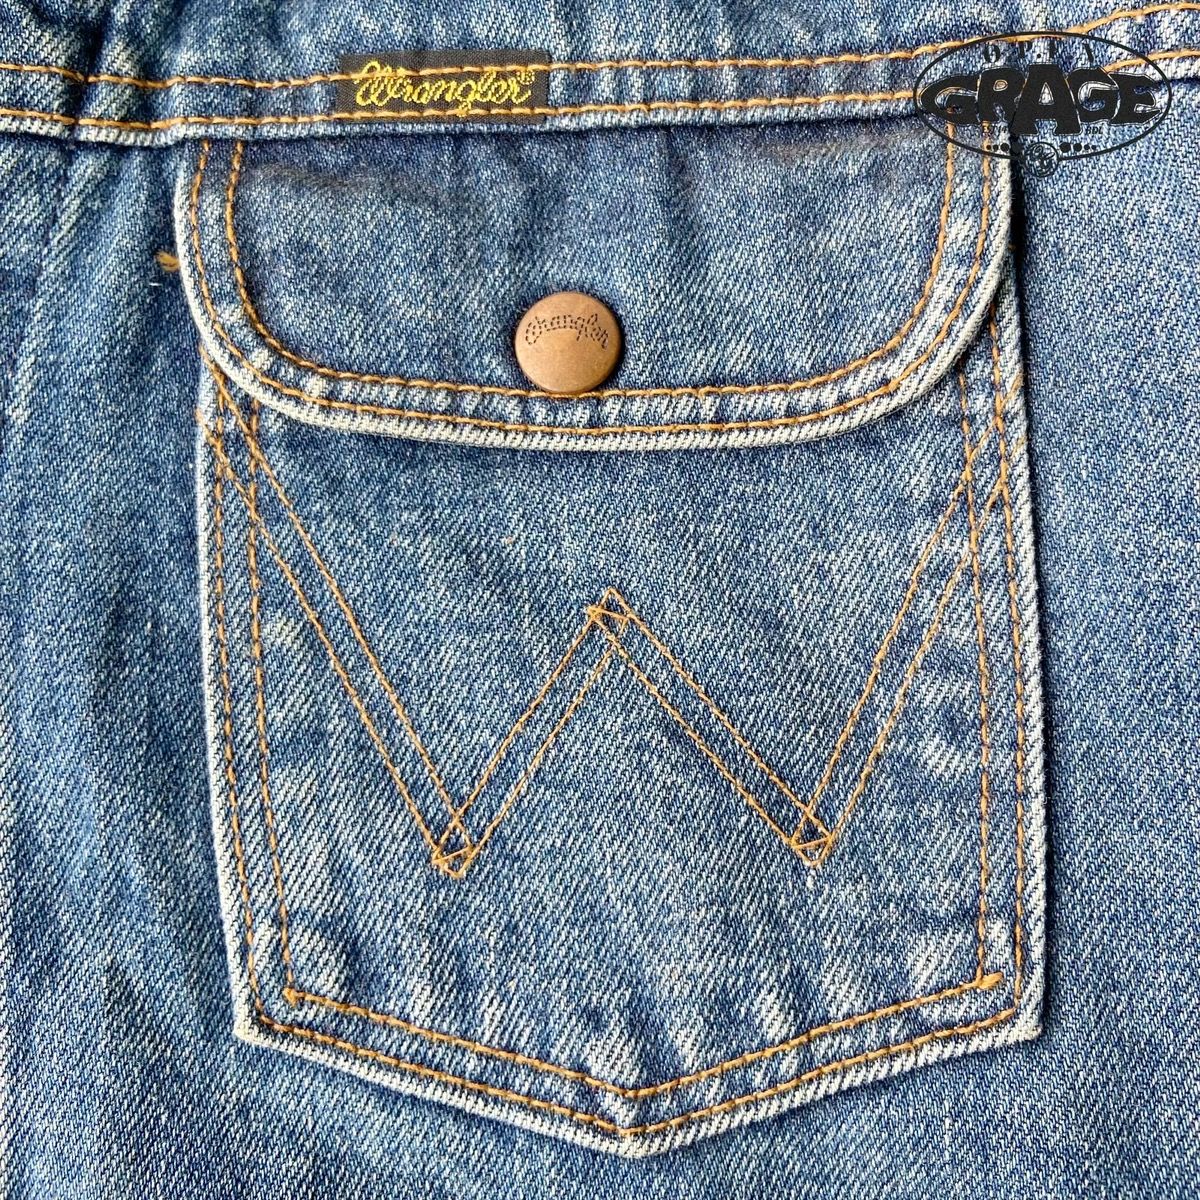 Archival Clothing - Collectible Classic VTG Wrangler Jean Jacket Worn by Icons - 6